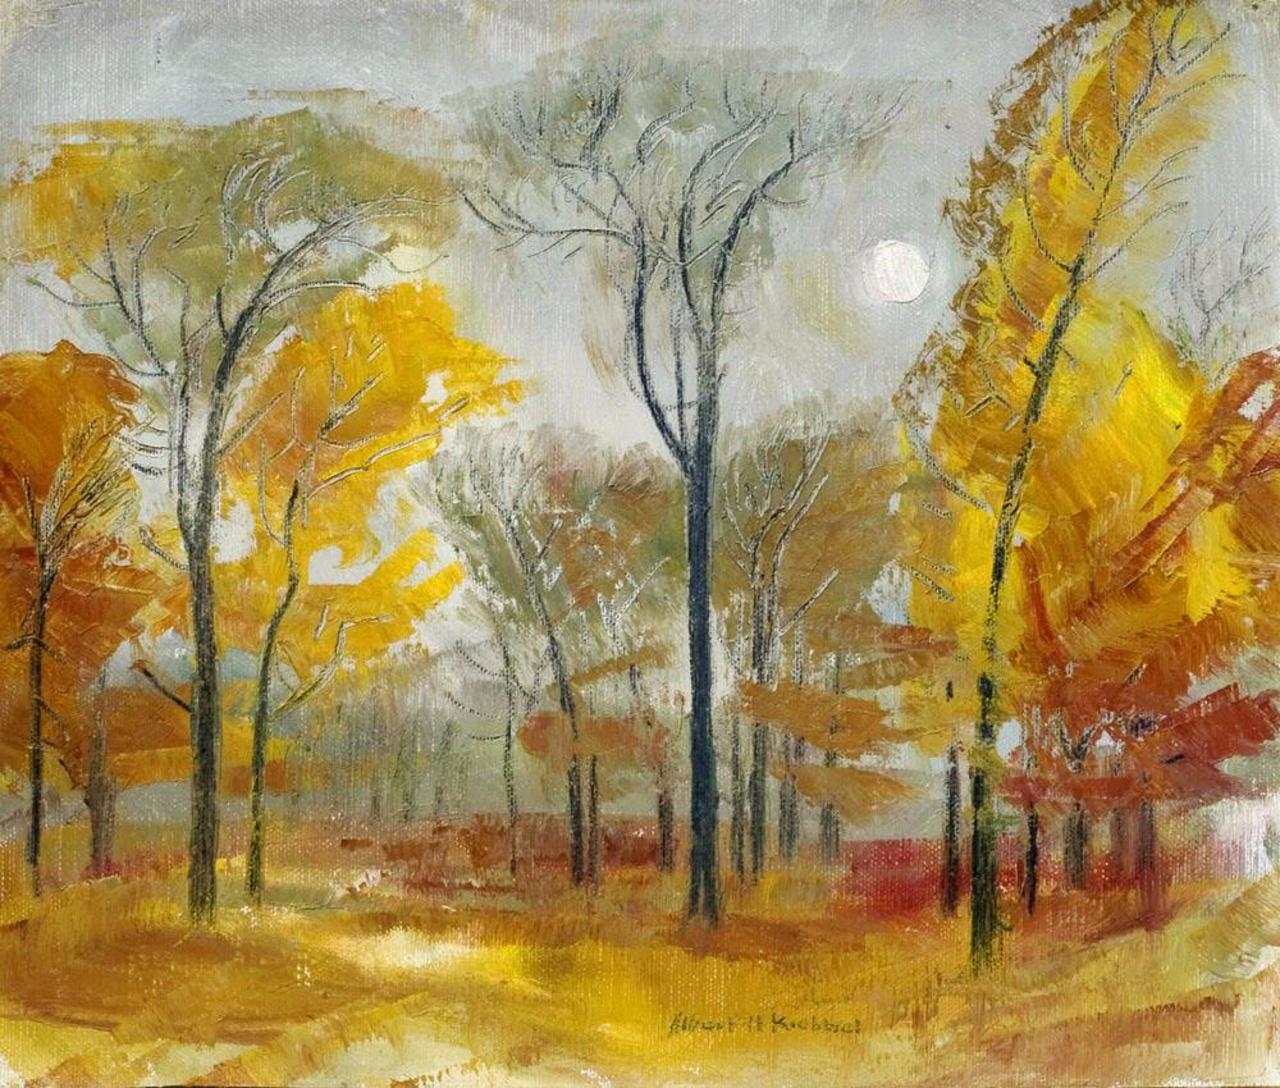 American Impressionist Albert Krehbiel, born this day in 1873 - here's an Autumn Landscape by him #art http://t.co/N0A7mKlRO2